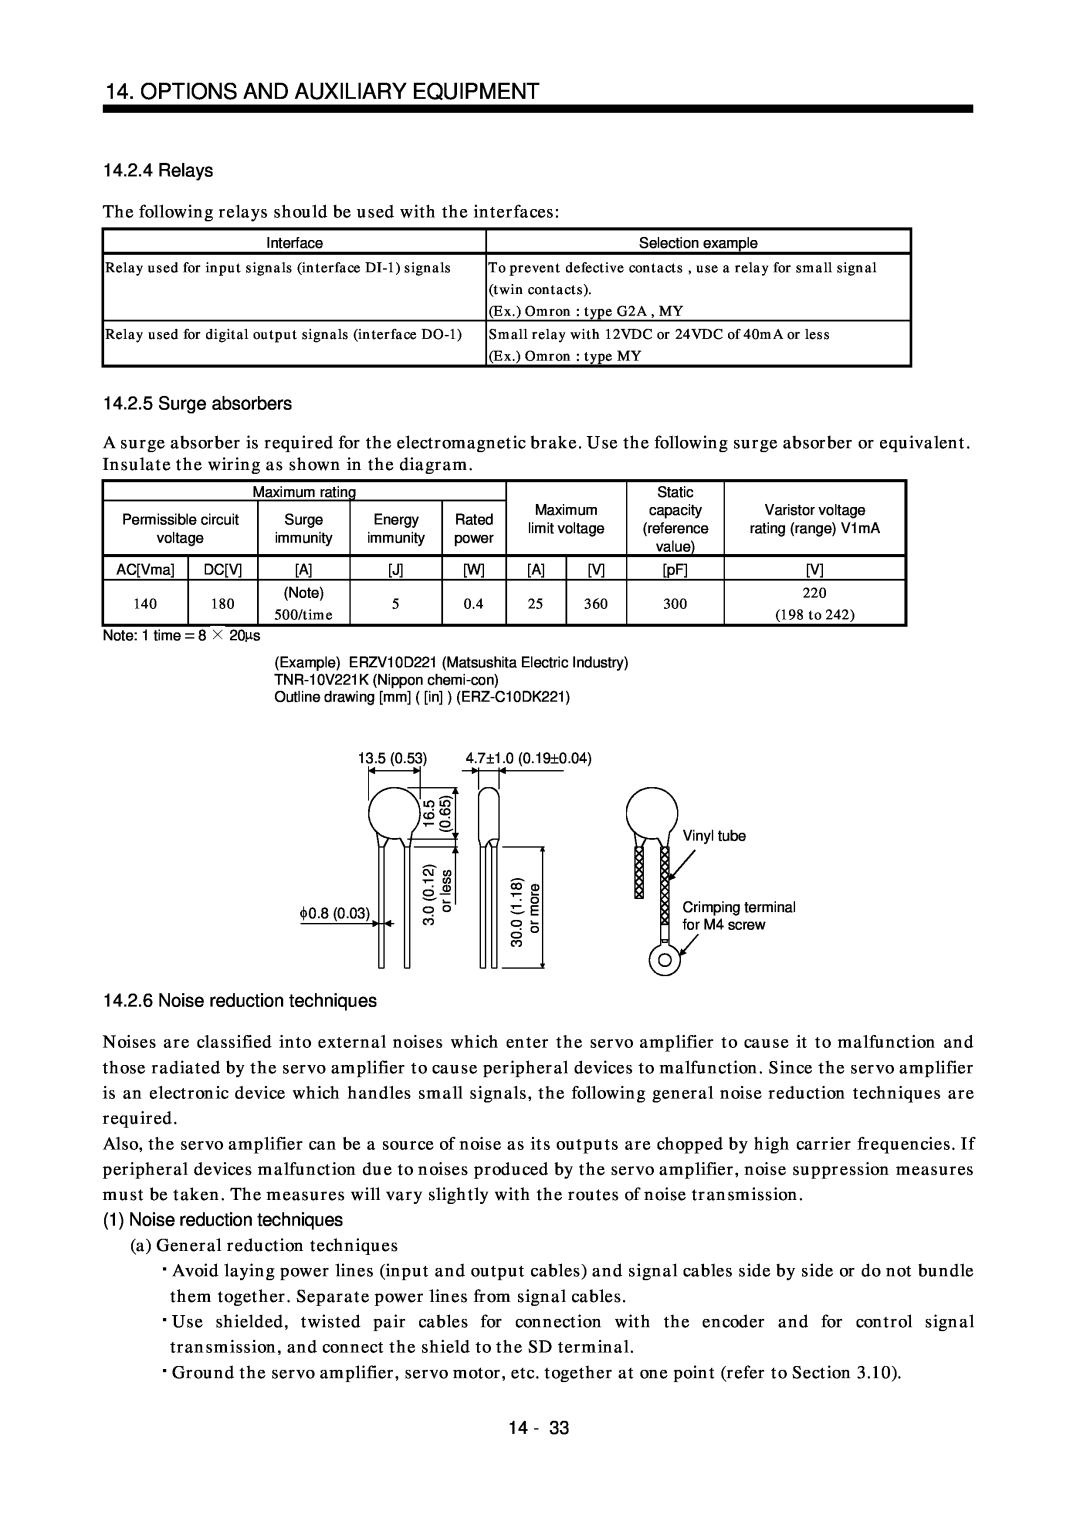 Mitsubishi Electronics MR-J2S- CL specifications Relays, Surge absorbers, 1Noise reduction techniques, 14 